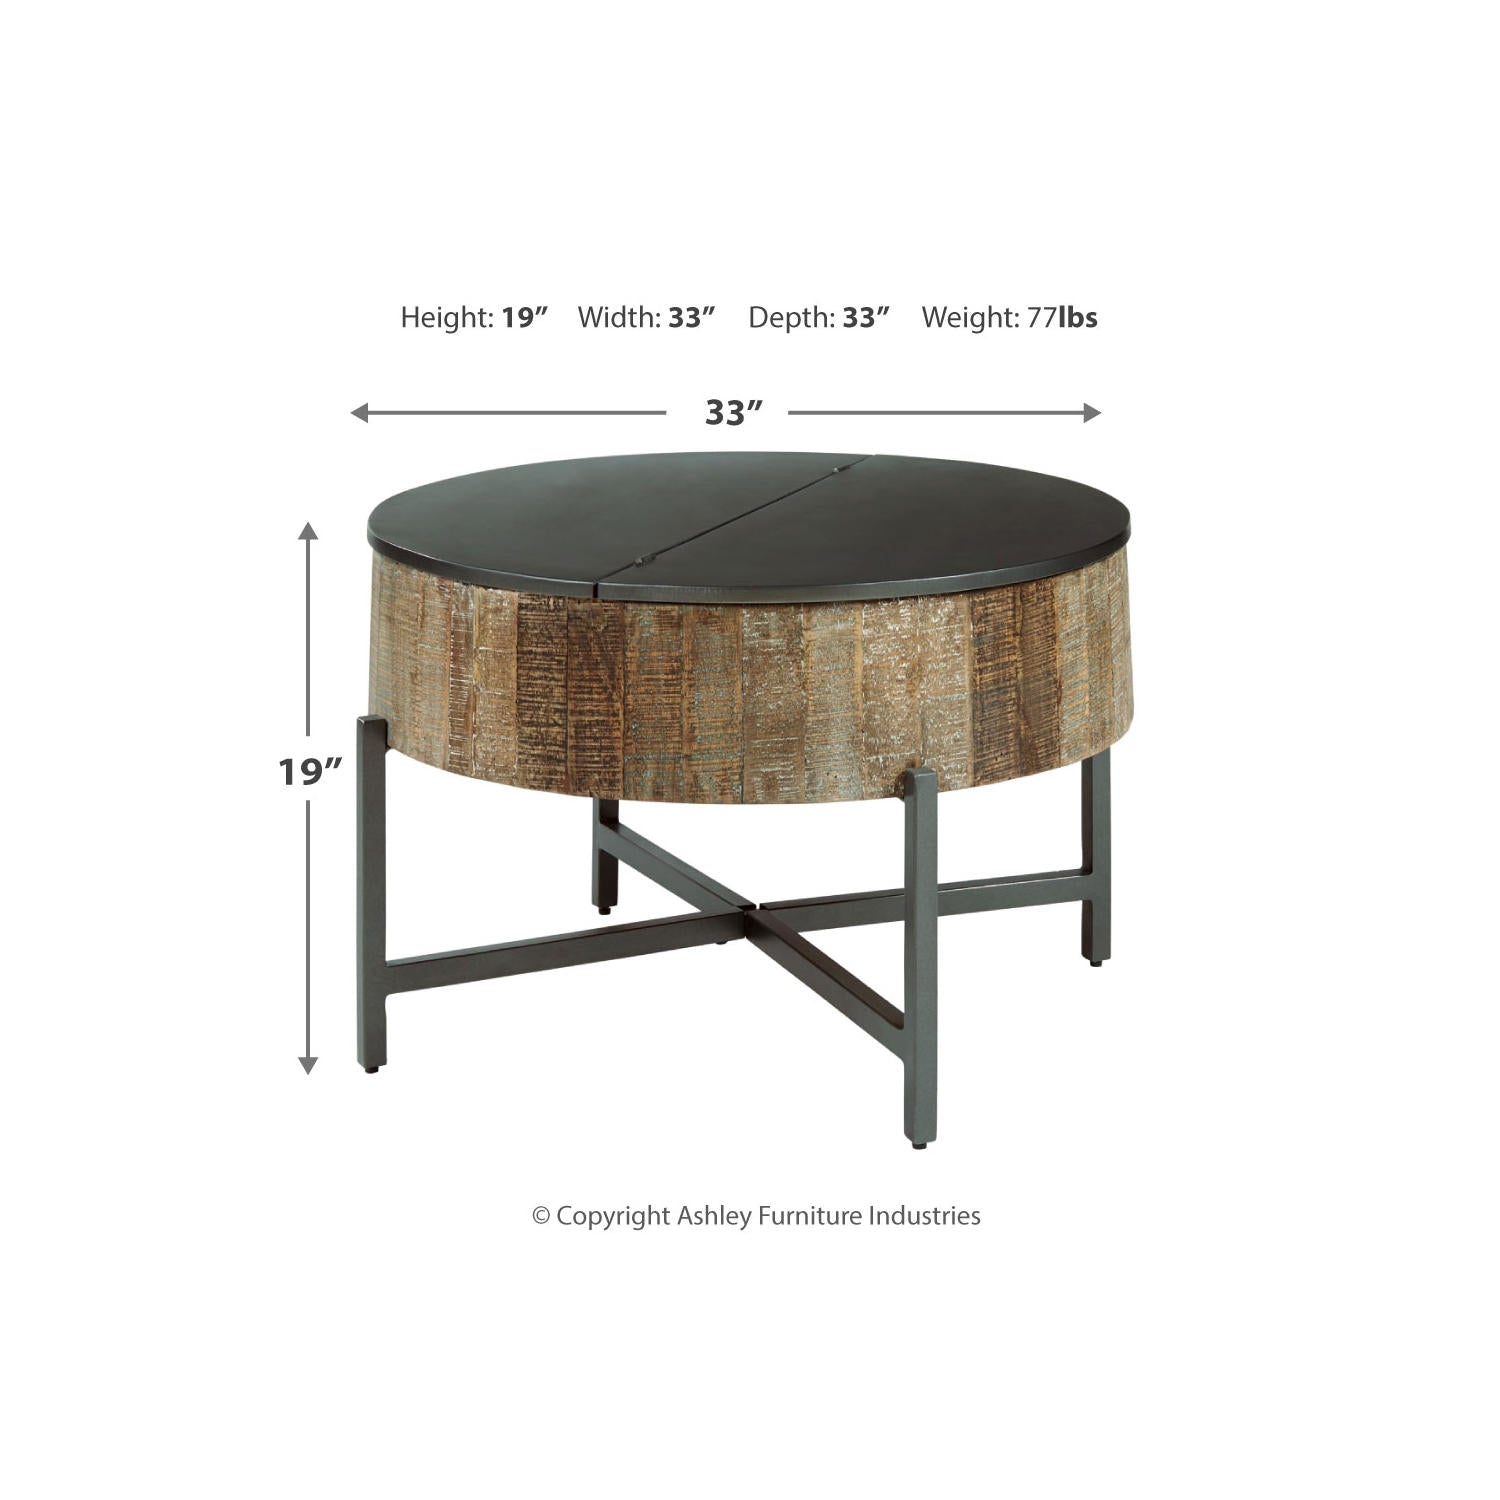 Nashbryn Round Coffee Table - Gray/Brown